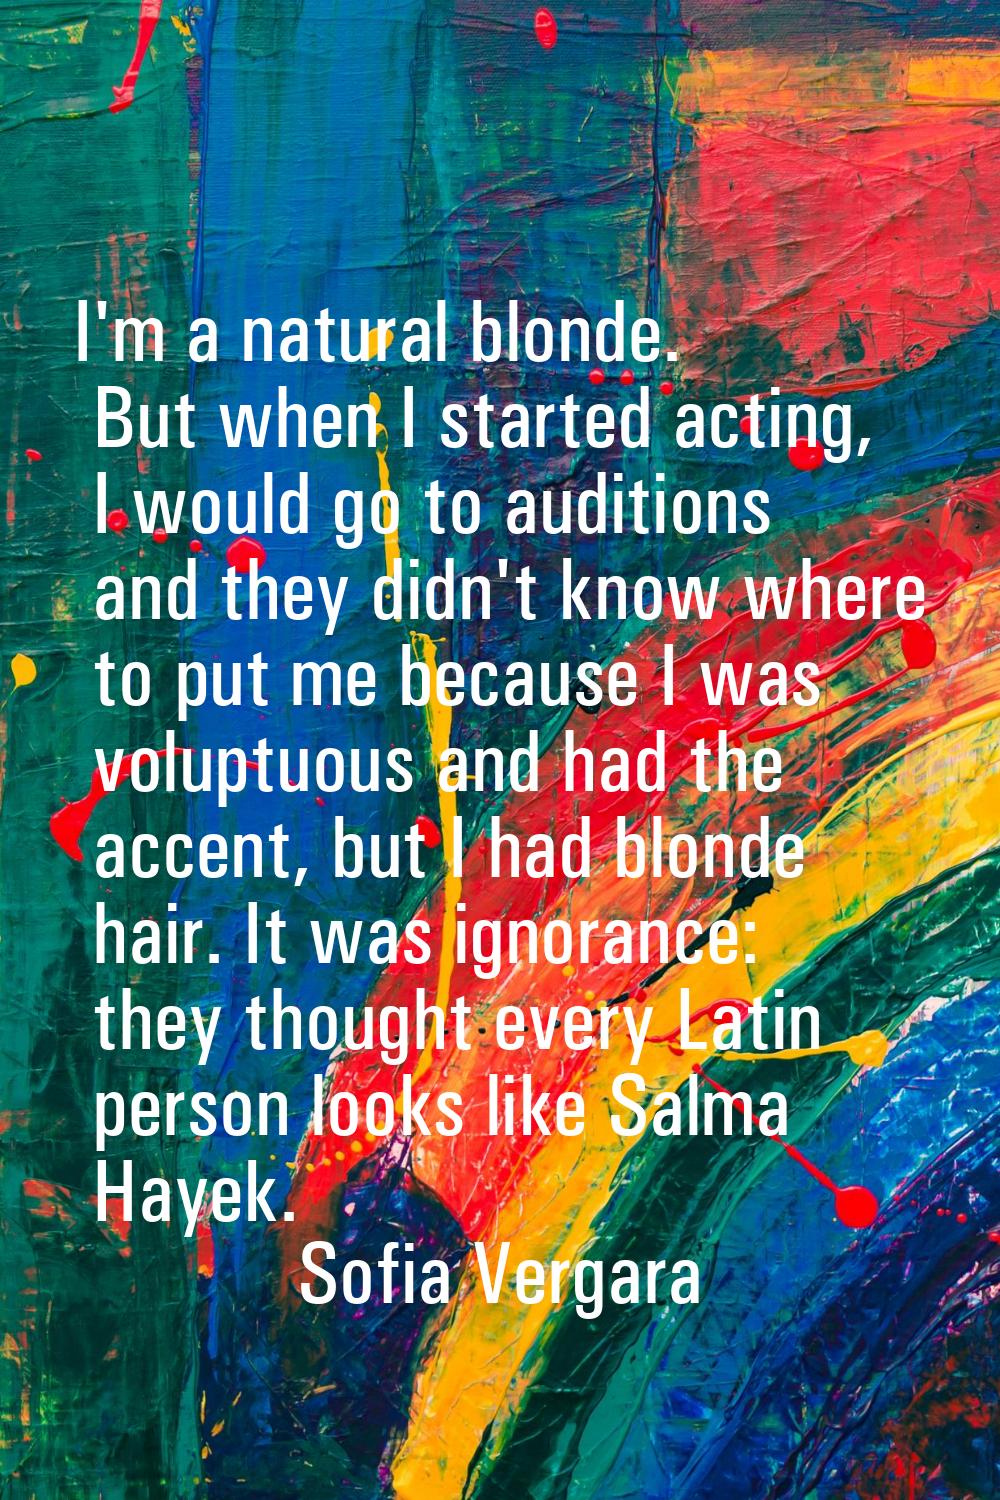 I'm a natural blonde. But when I started acting, I would go to auditions and they didn't know where